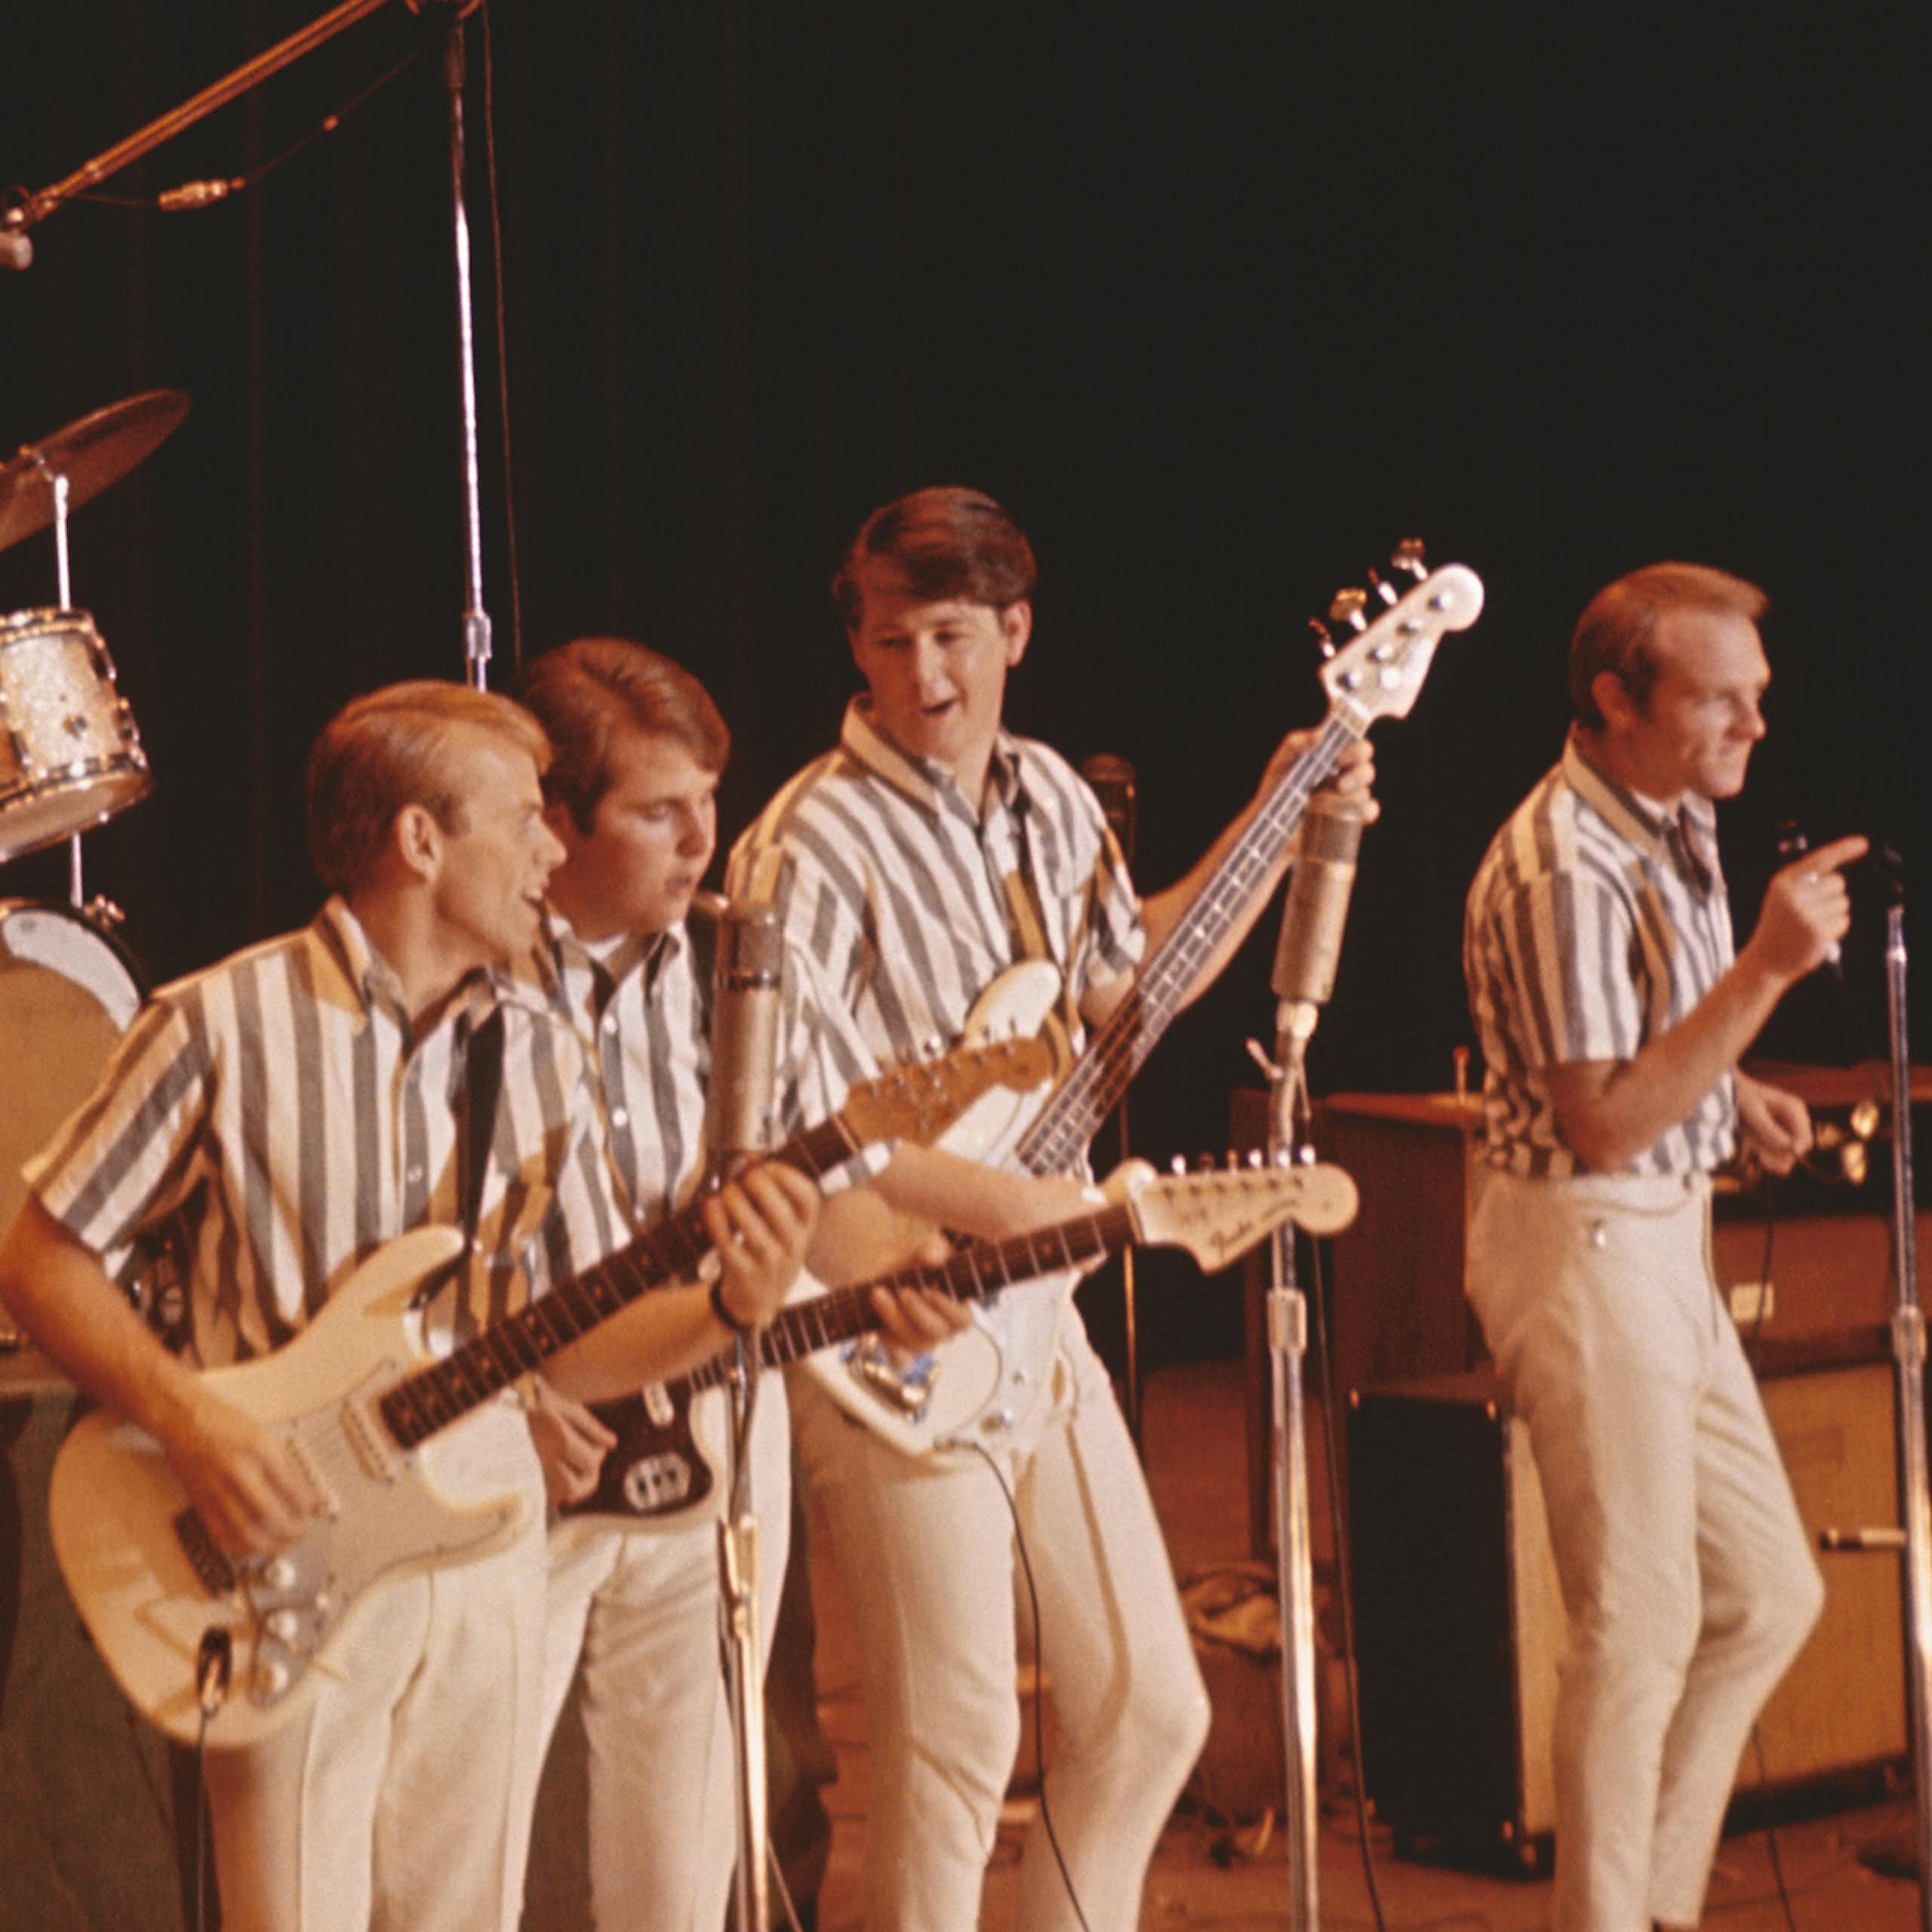 New Disney documentary The Beach Boys tells the iconic band’s story – but not the whole story